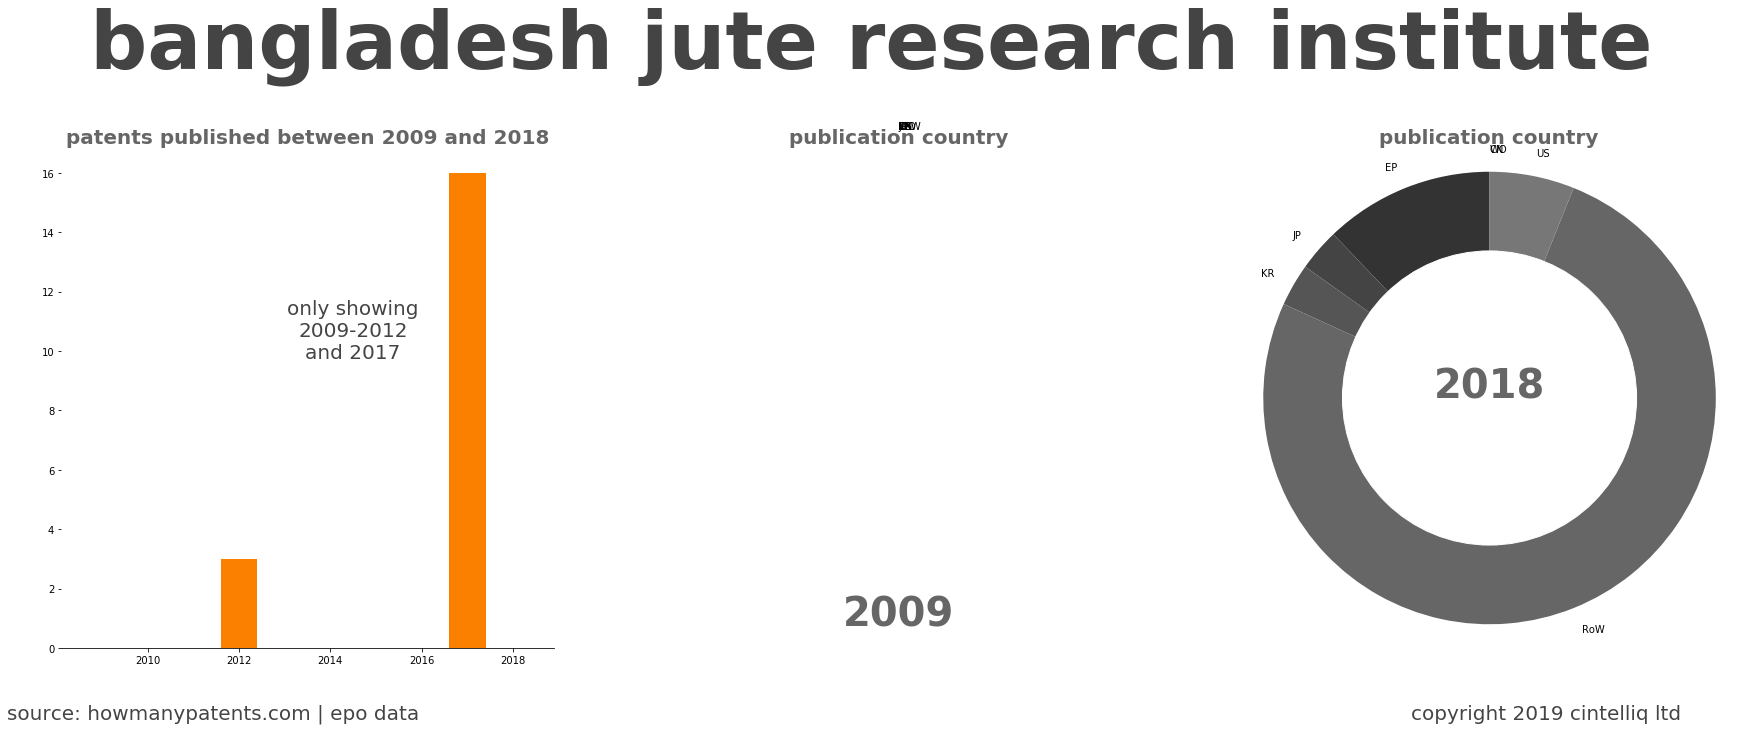 summary of patents for Bangladesh Jute Research Institute